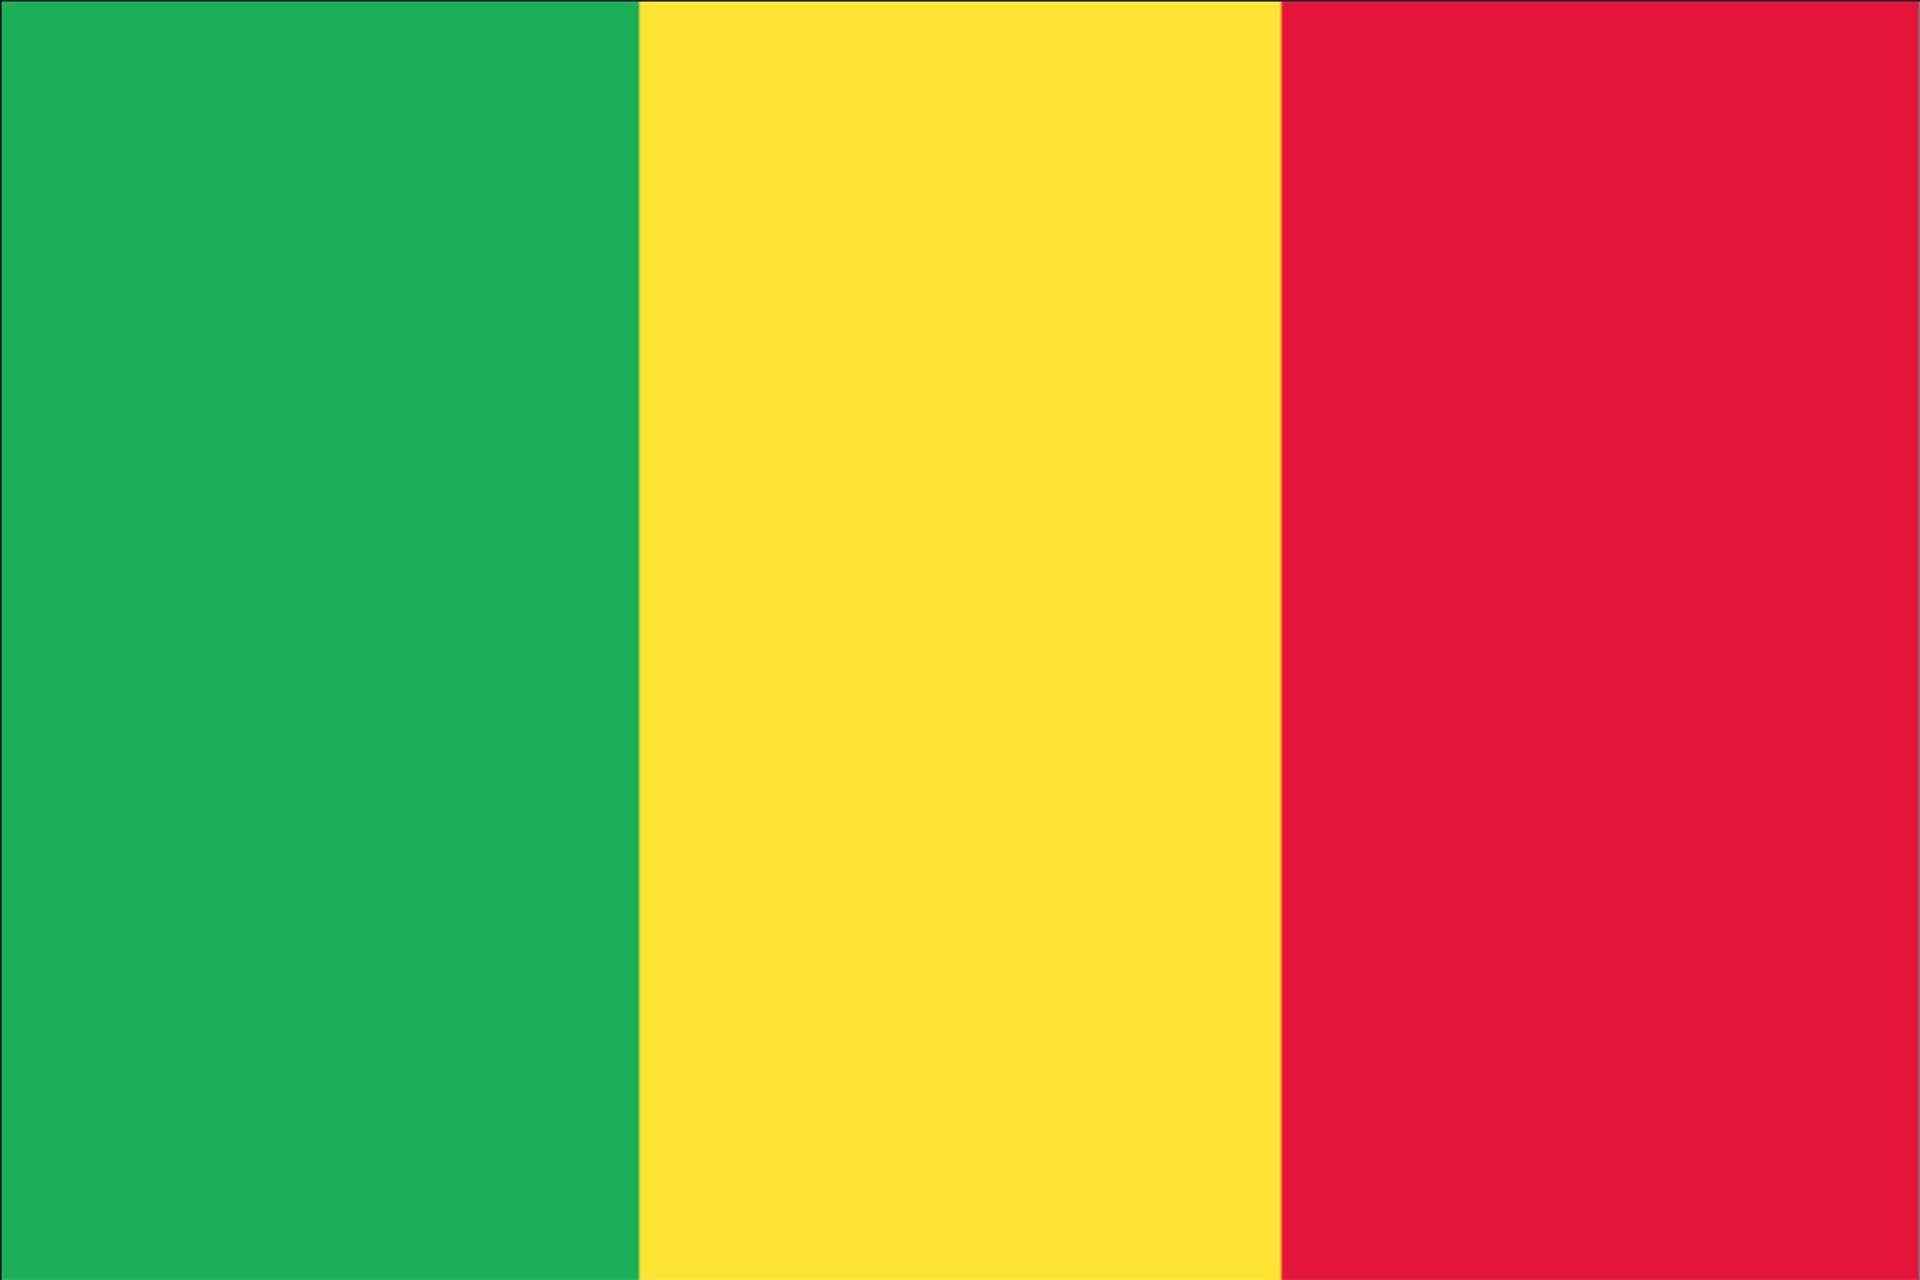 110 flaggenmeer Querformat Flagge Mali Flagge g/m²